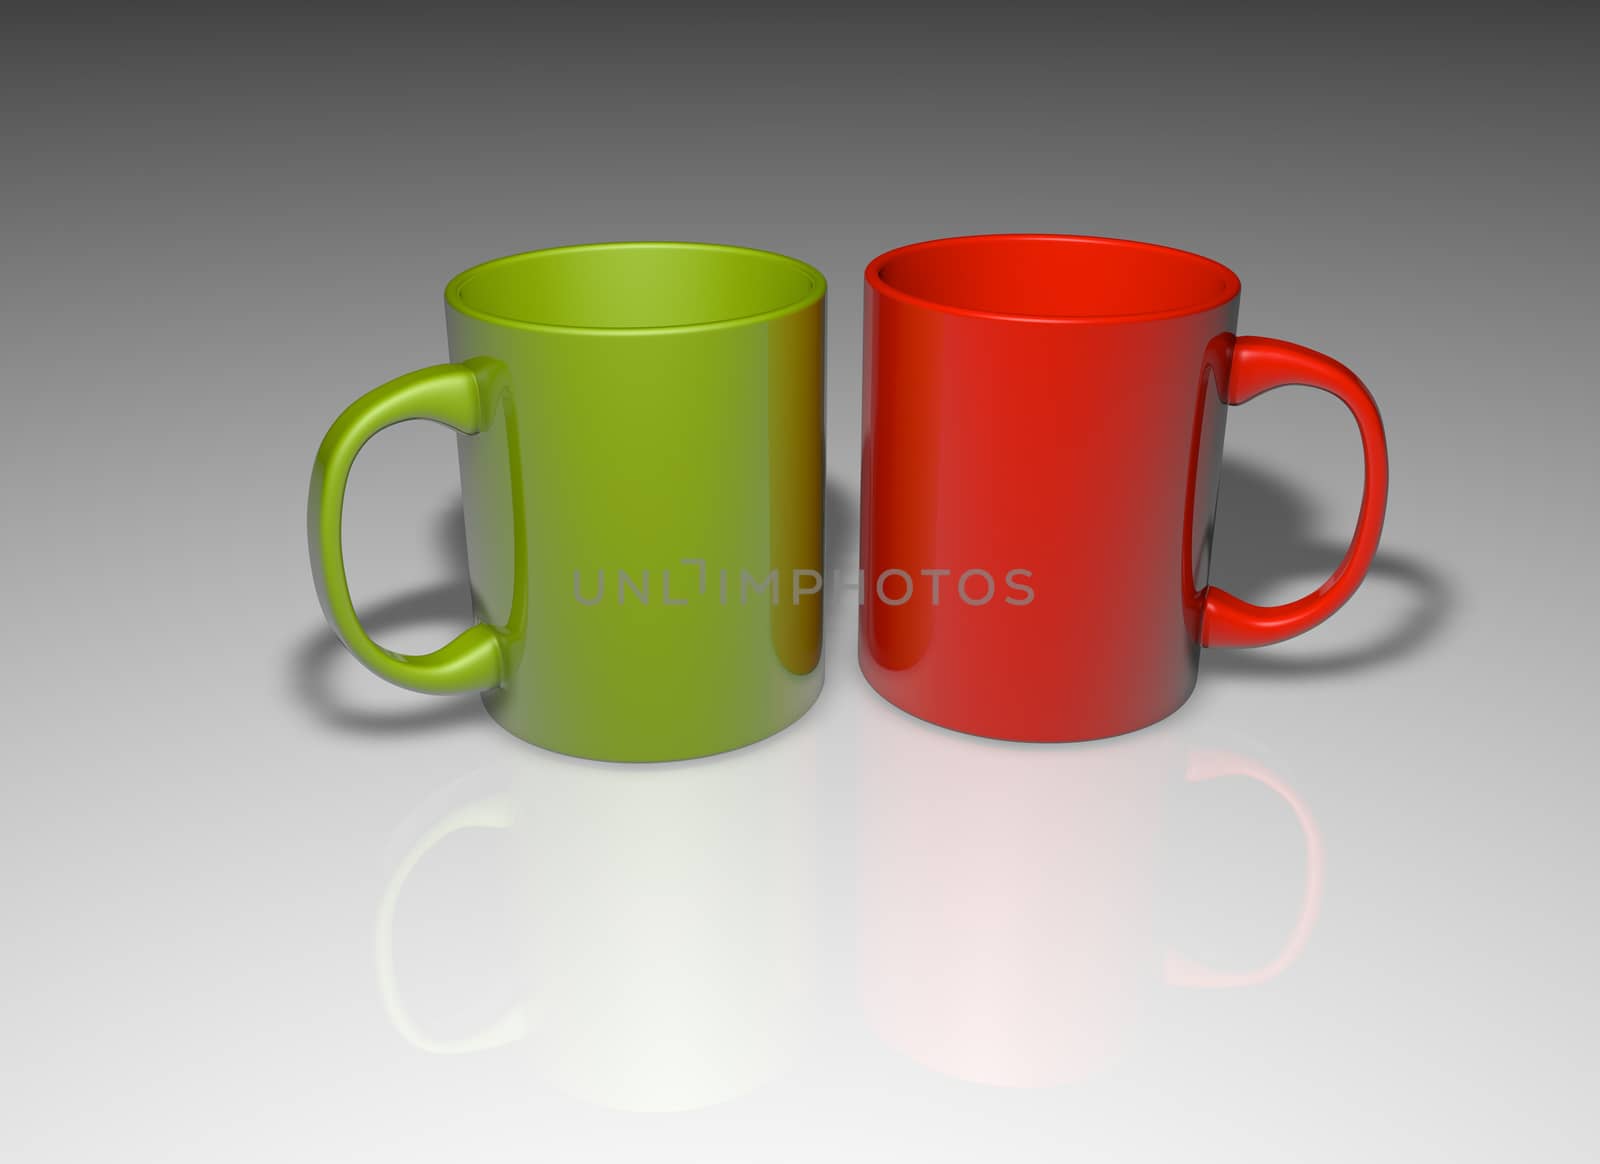 Cups on a white background